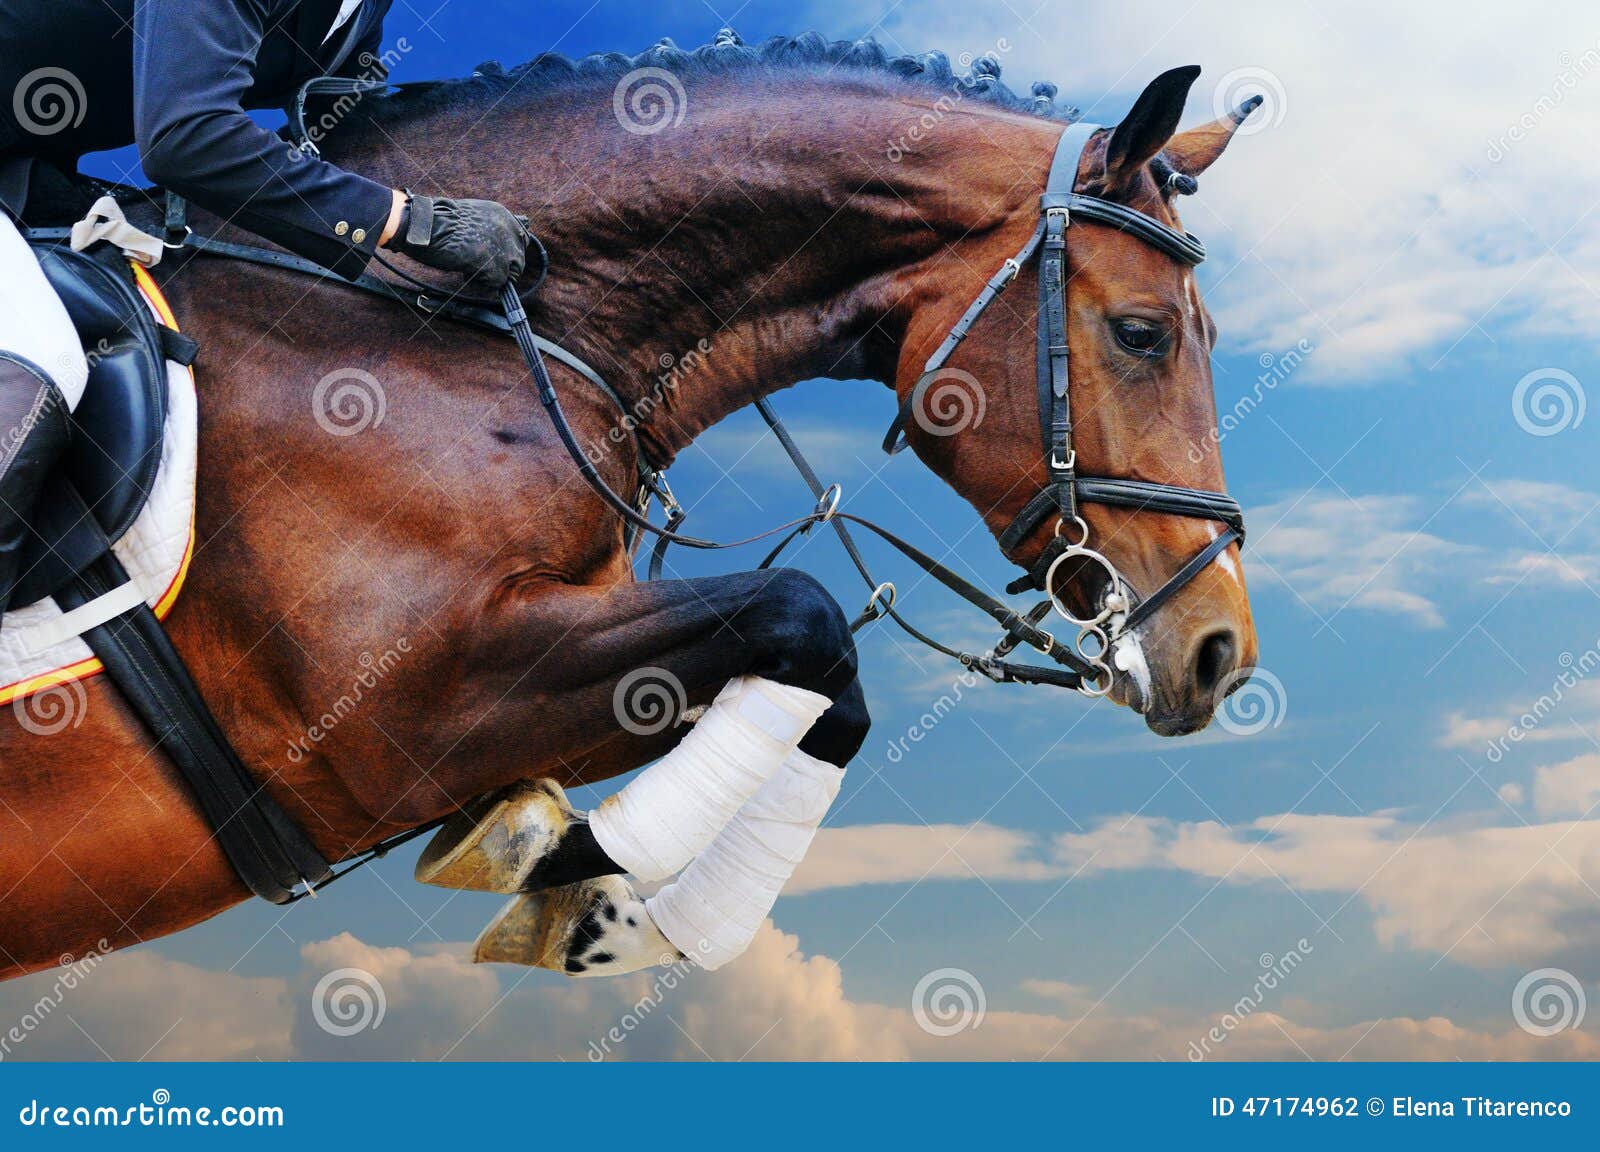 bay horse in jumping show against blue sky